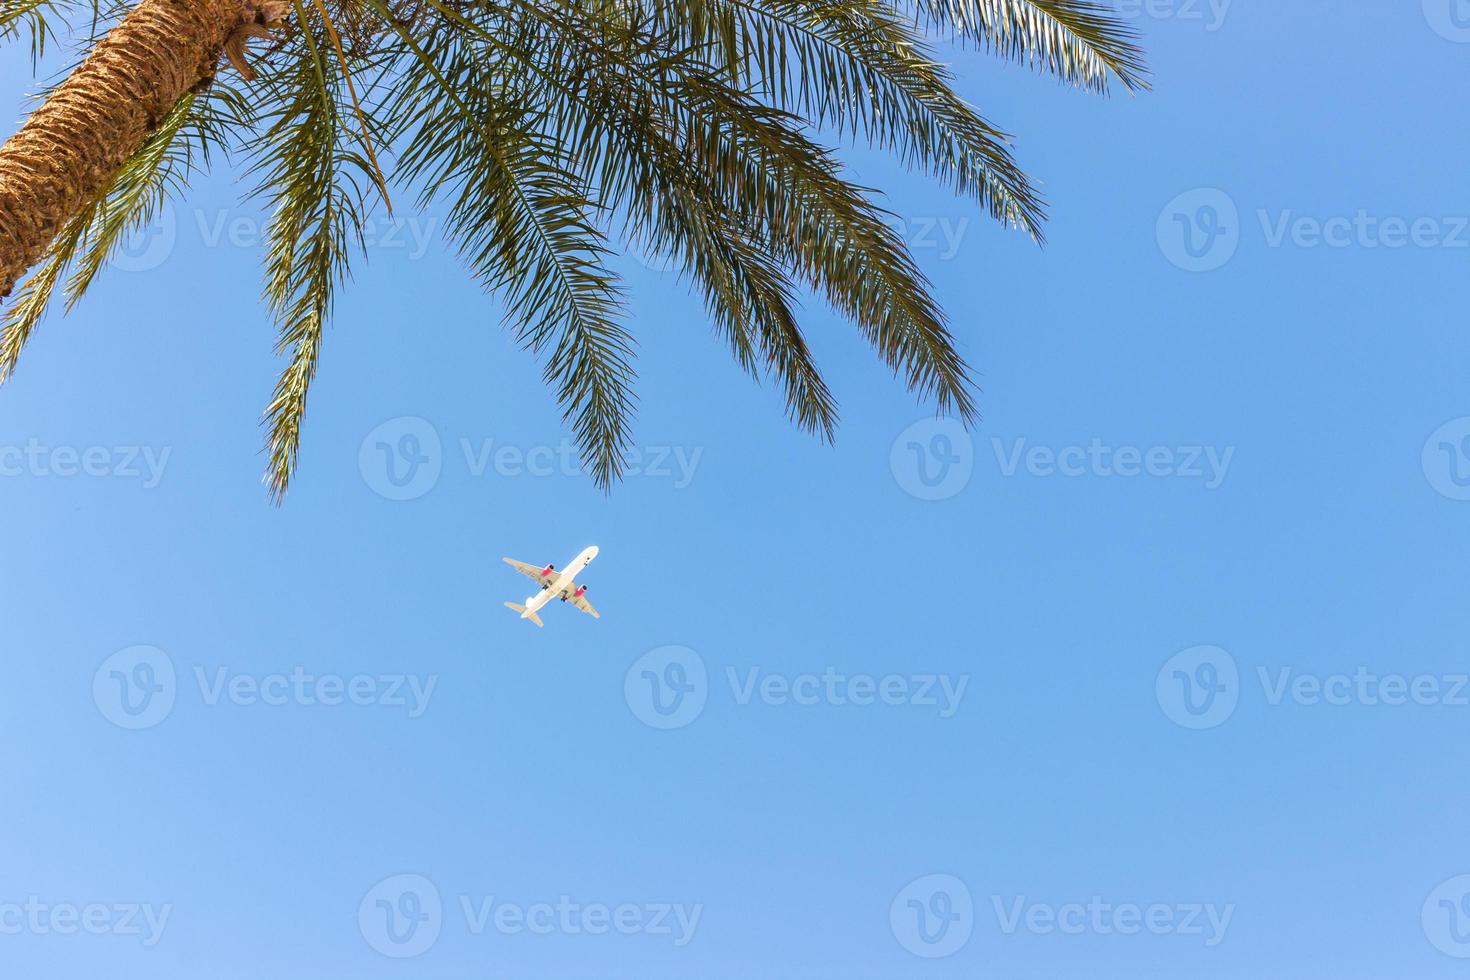 A commercial jet taking off over a palm tree, vacation time copy space photo